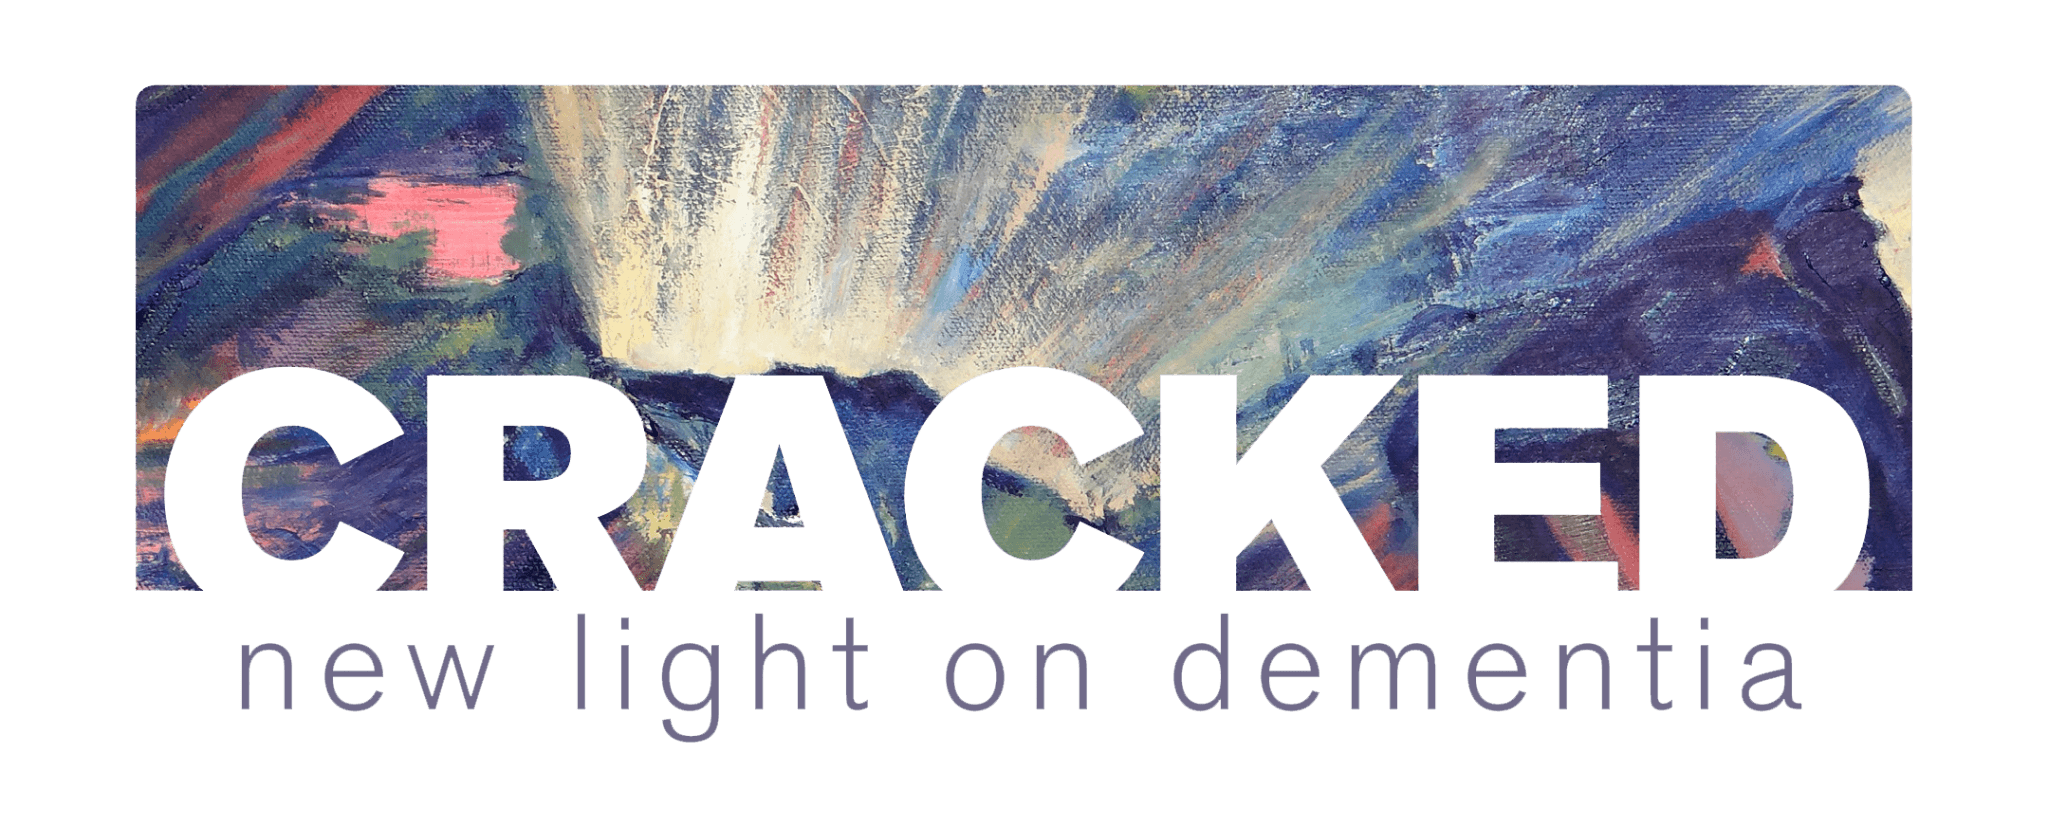 Cracked.com Logo - Cracked: New Light on Dementia. Learn About our Performance